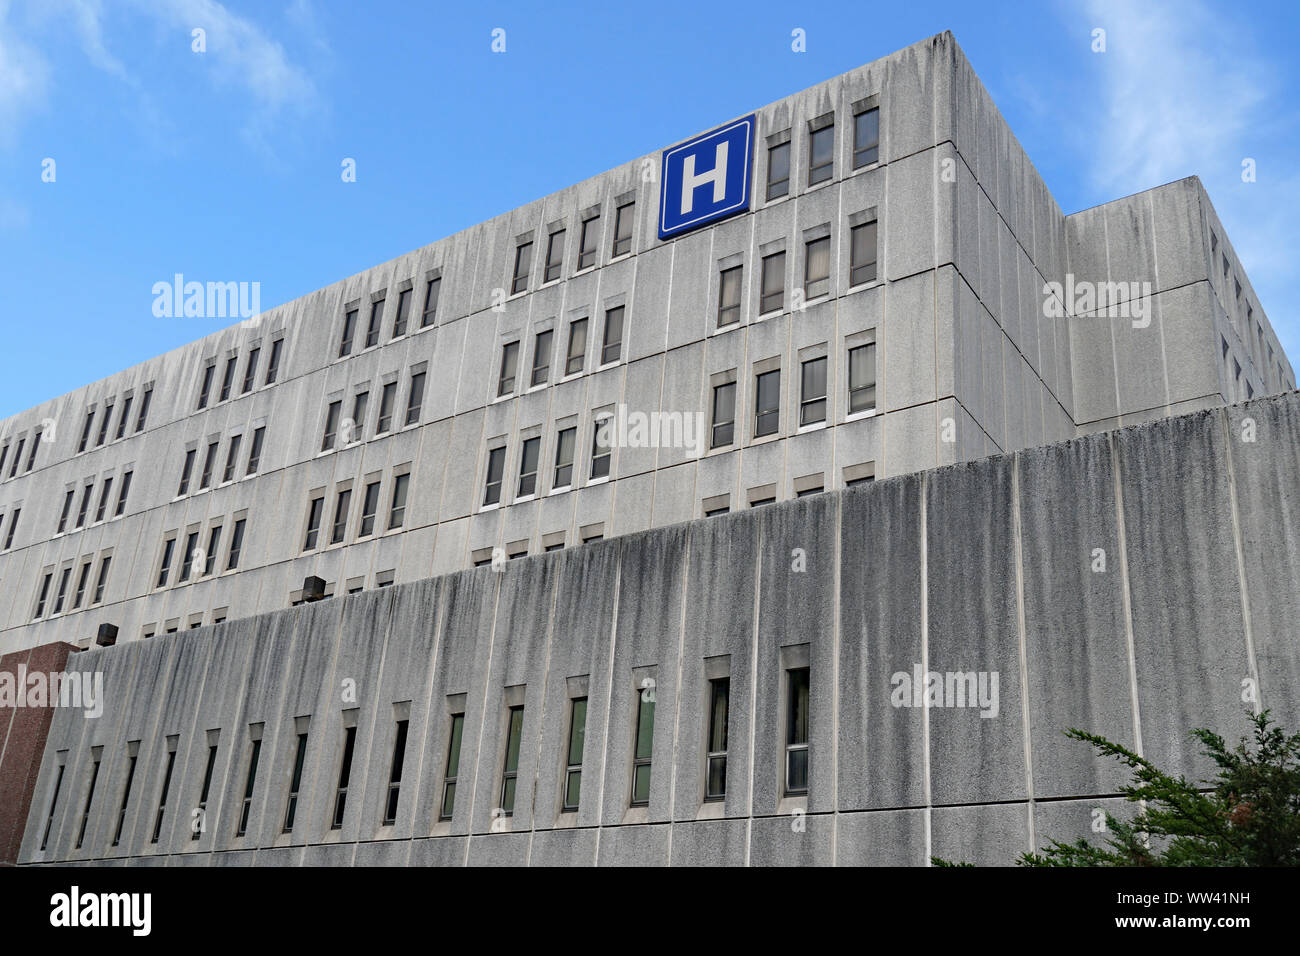 Large grey concrete building with H sign for hospital Stock Photo